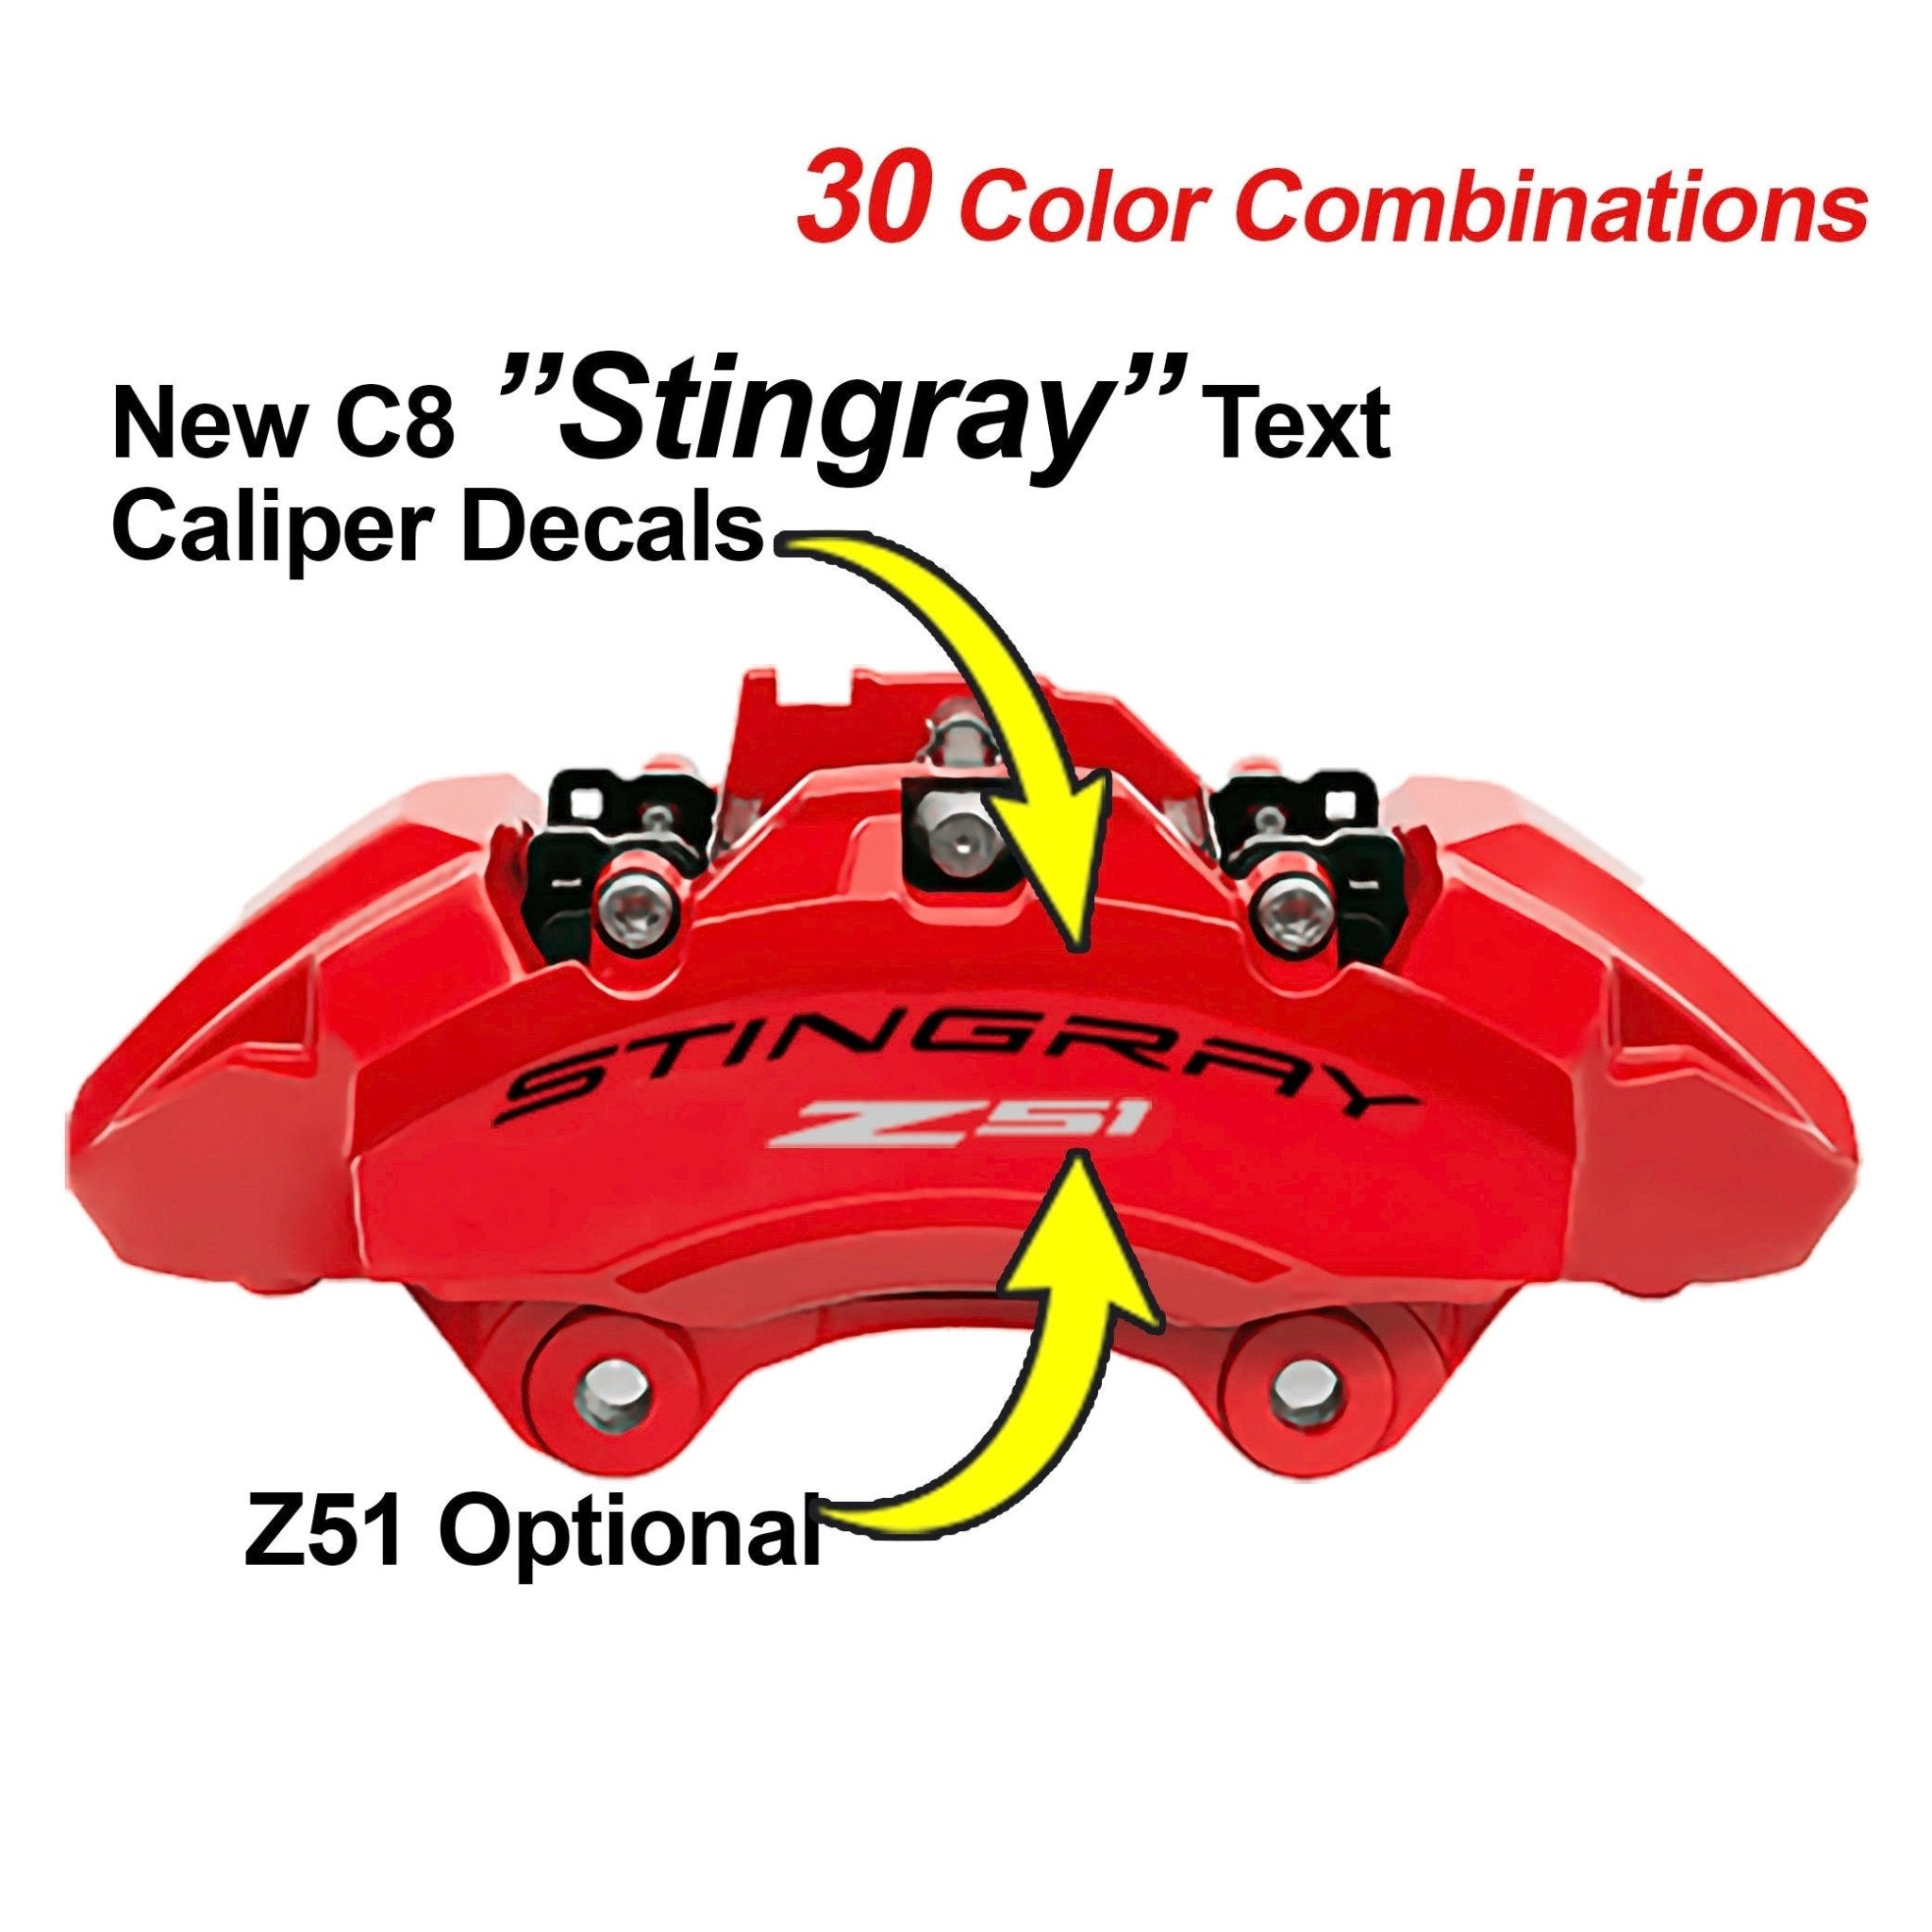 Corvette C8 "Stingray" Brake Caliper Decals - with or without Z51 Option - Vette1 - Caliper Decals